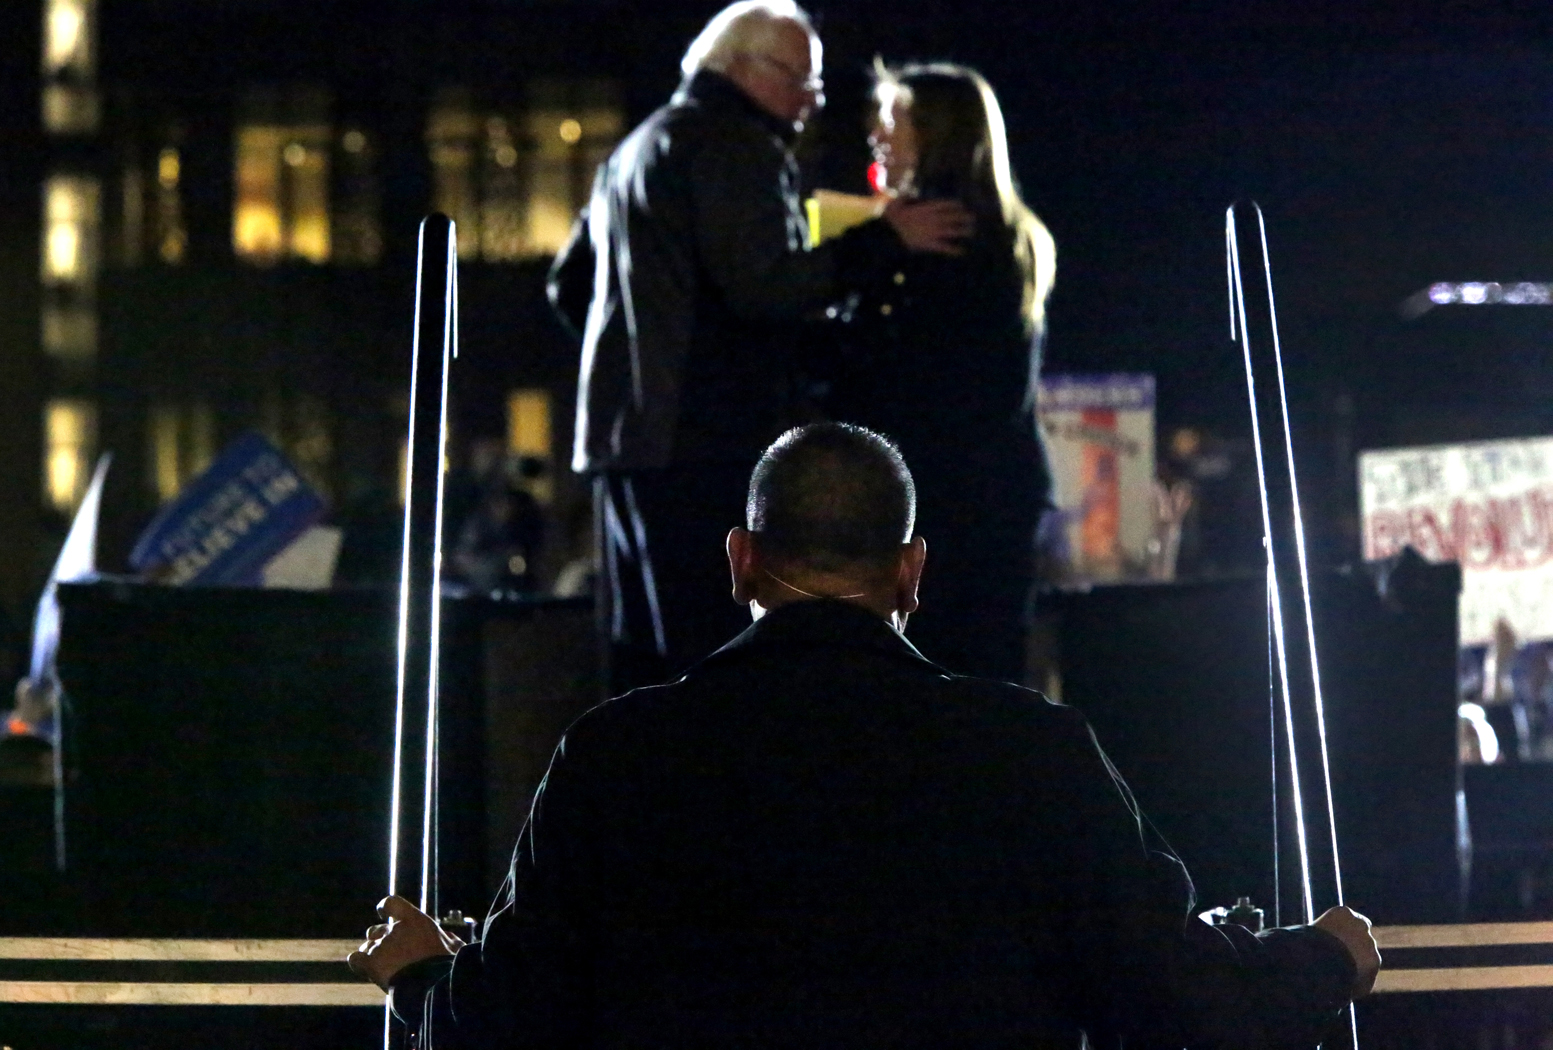 U.S. Presidential candidate Bernie Sanders (I-VT) and his wife, Mary Jane O'Meara Sanders, wave goodbye to a crowd gathered at Washington Square Park in Manhattan, NY, on April 13, 2016. (For Washington Post)